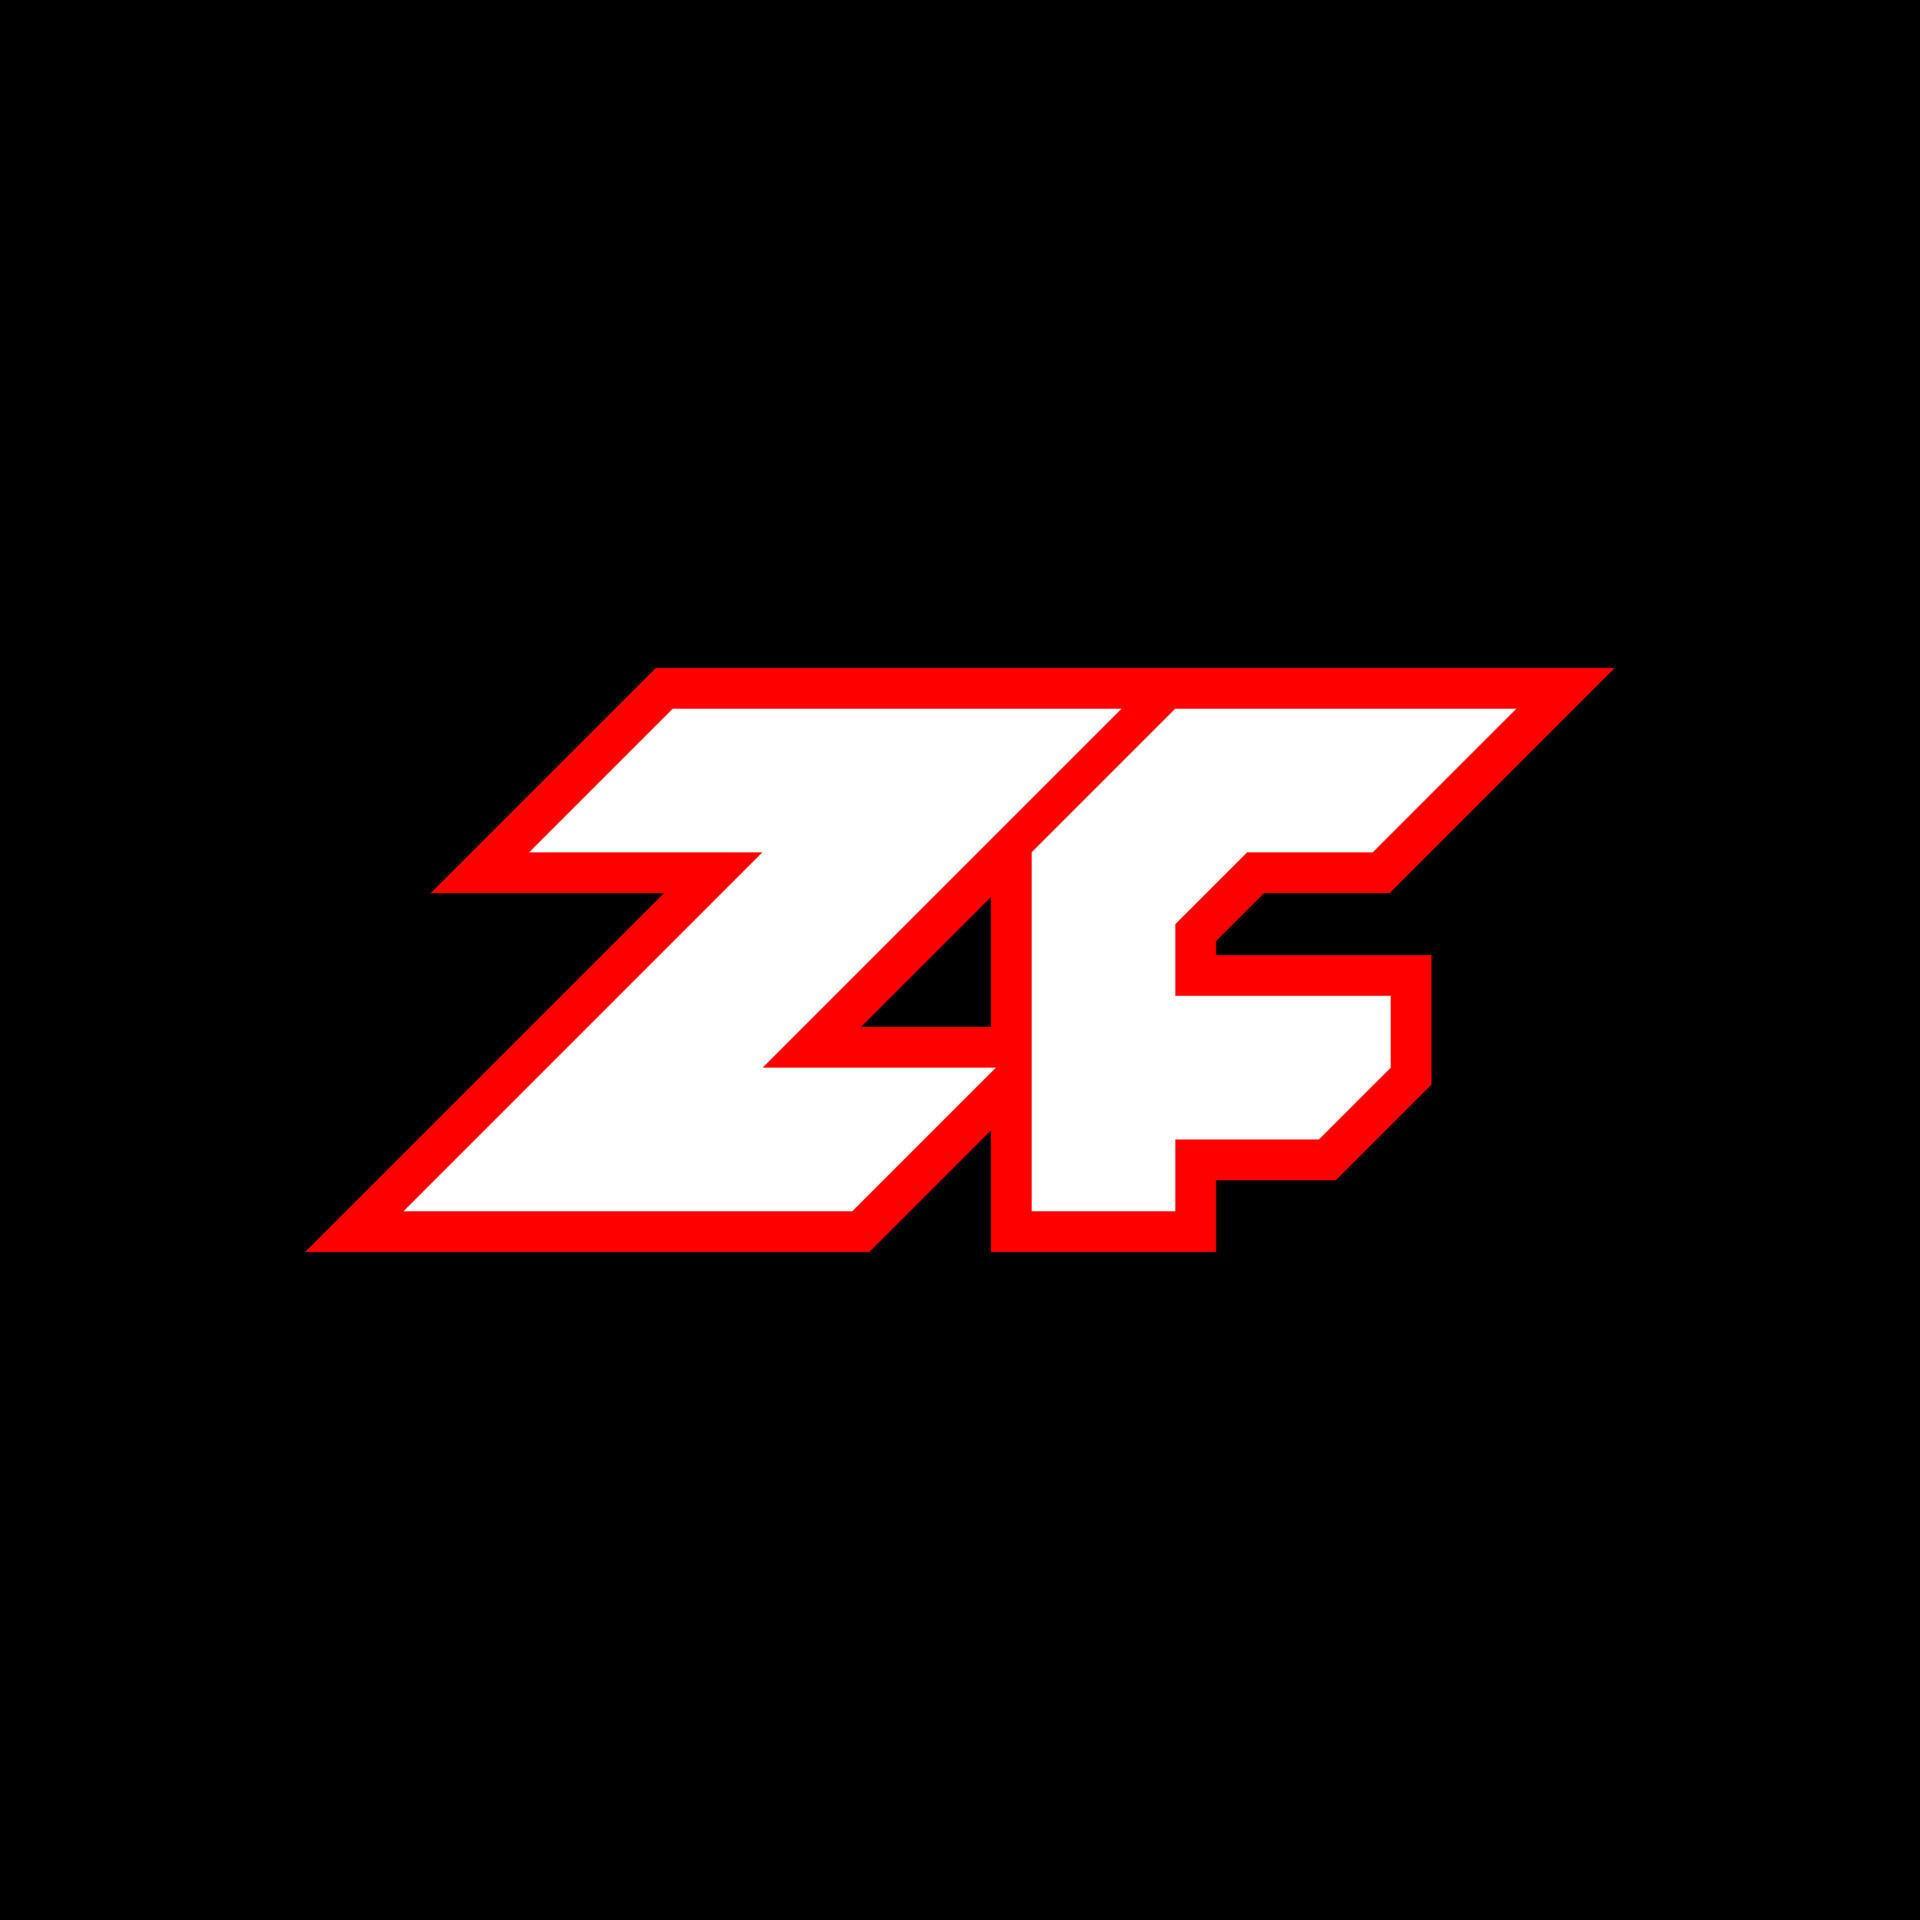 Zf Logo Design Initial Zf Letter Design With Sci Fi Style Zf Logo For Game Esport Technology